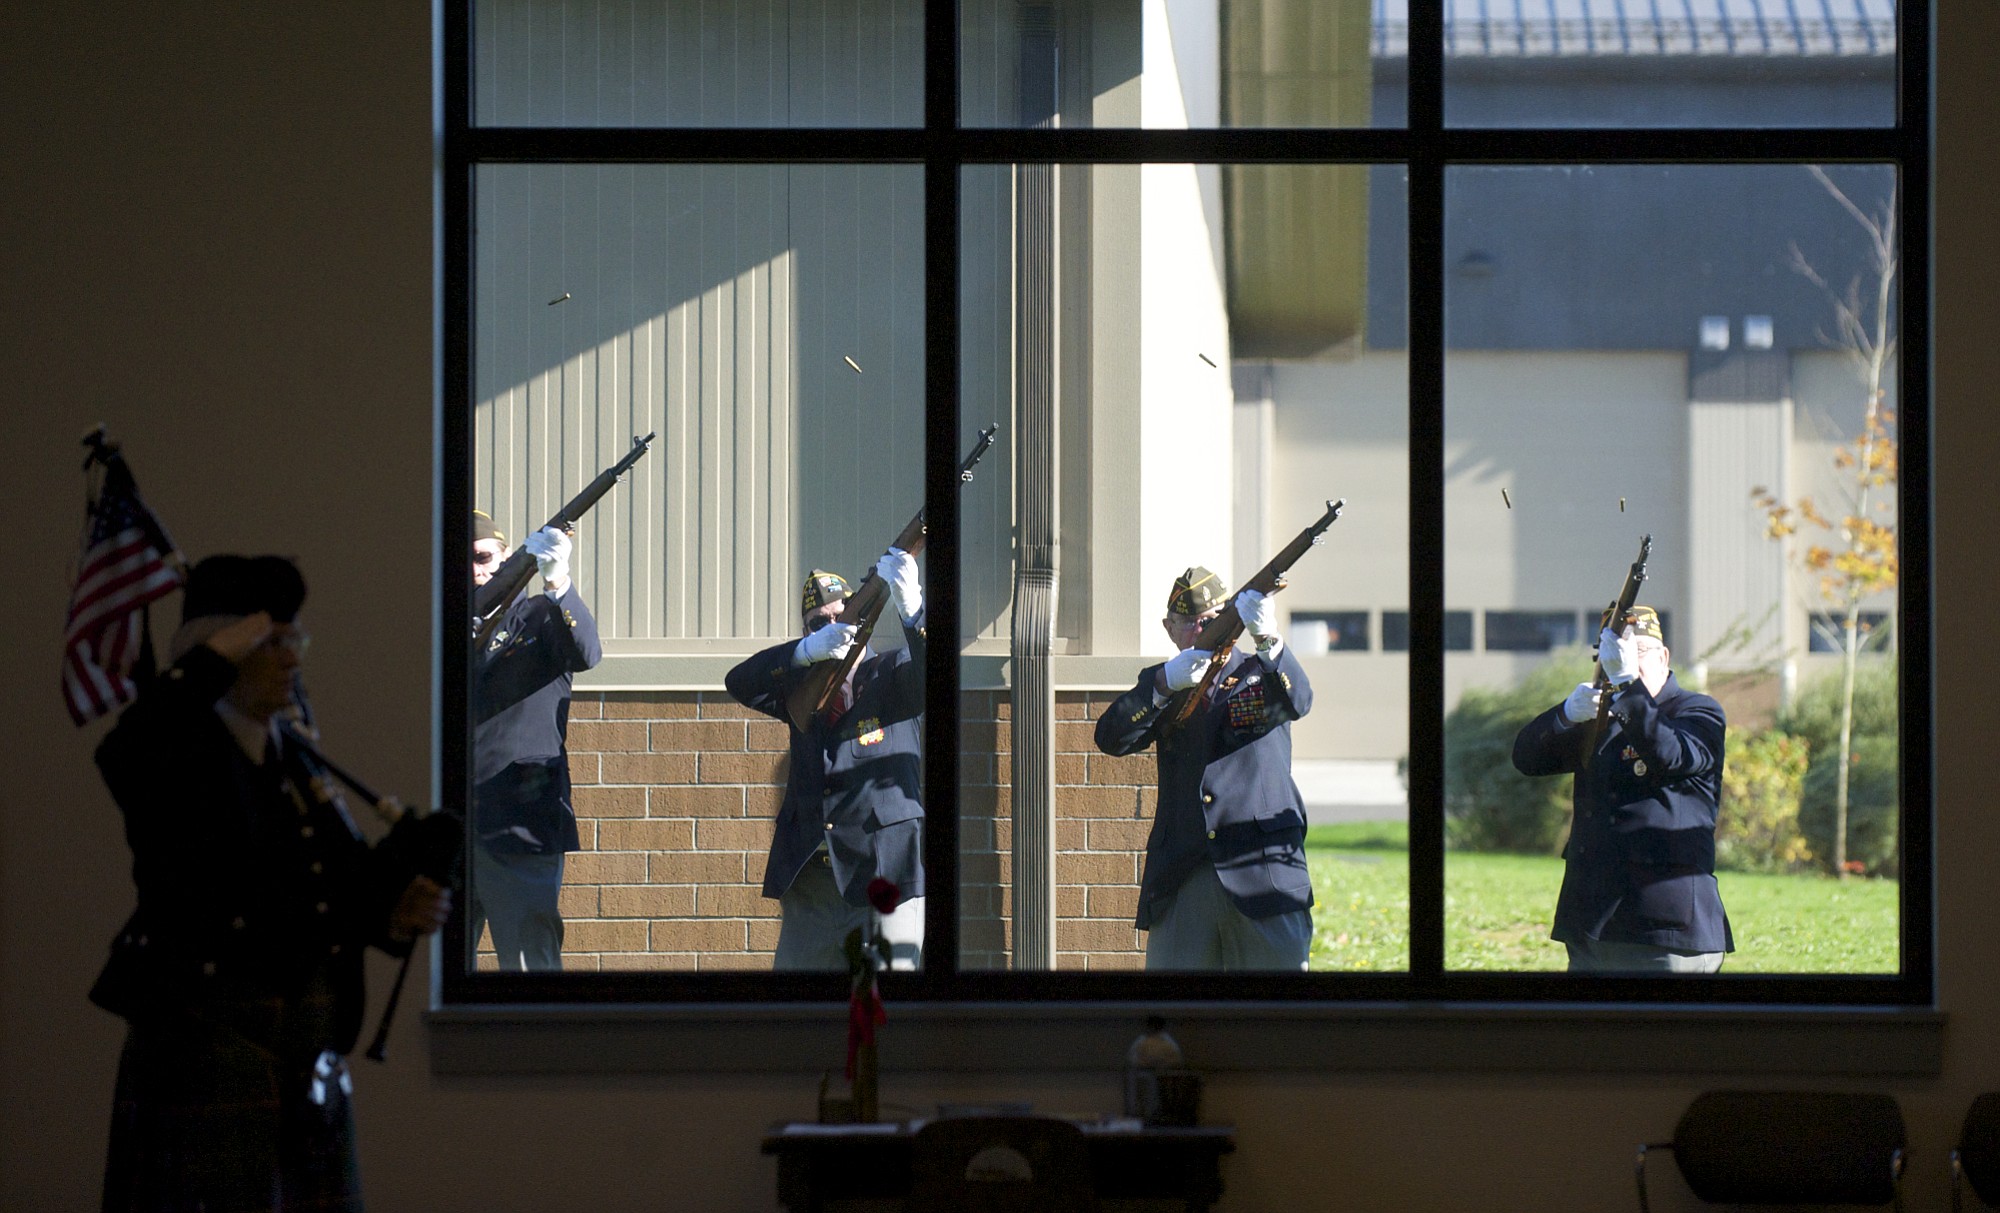 VFW members fire a rifle salute Tuesday rifle during the Veterans Day Celebration at the Armed Forces Reserve Center in east Vancouver.